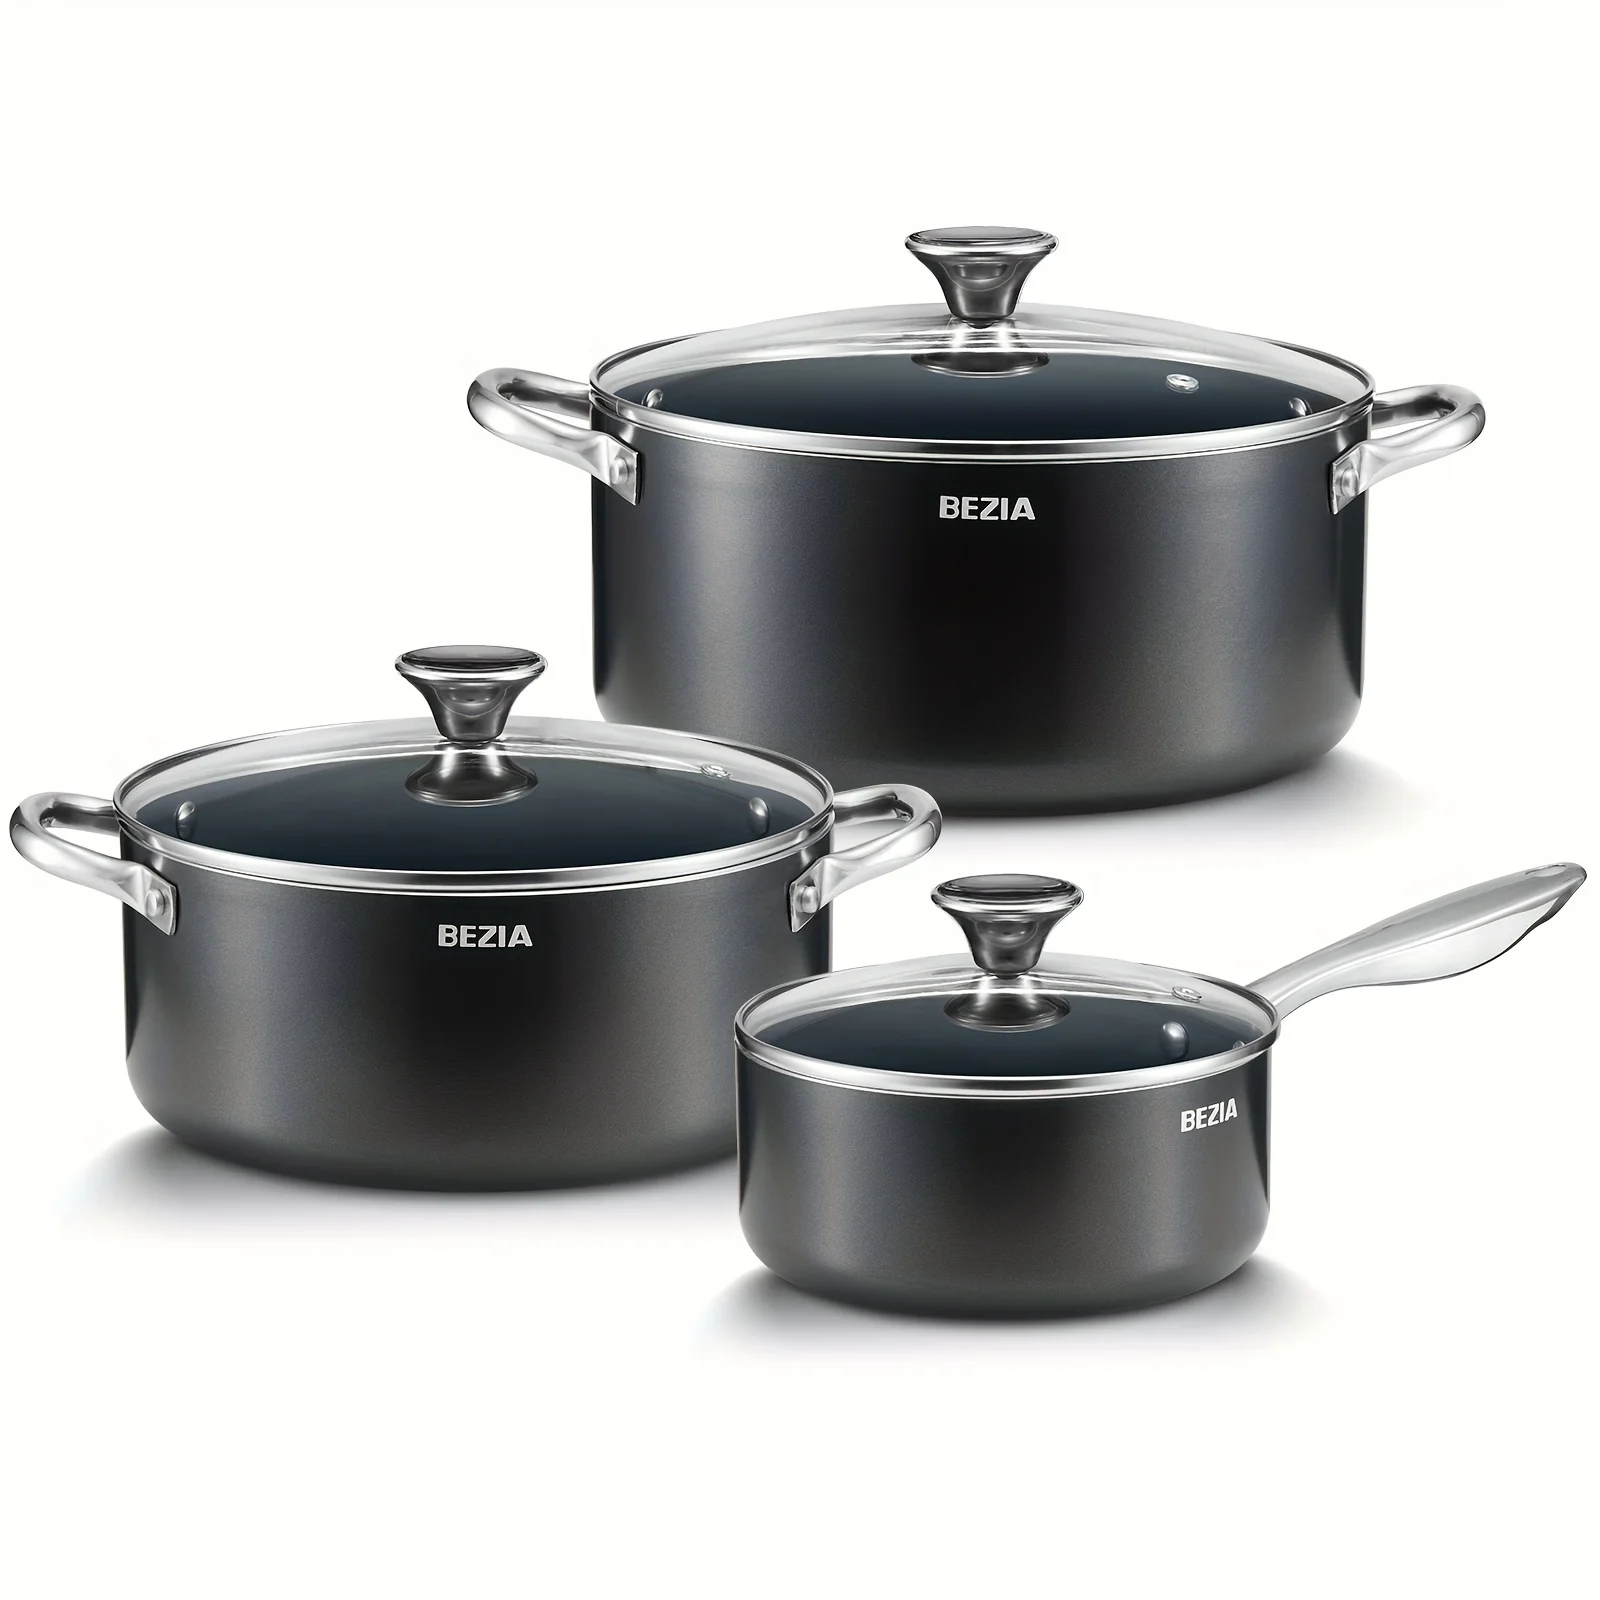 

Induction Cookware Set 6-Piece, Pots and Pans Set with Non-Stick Ceramic Coating, Stainless Steel Handles & Lids, Dishwasher Saf